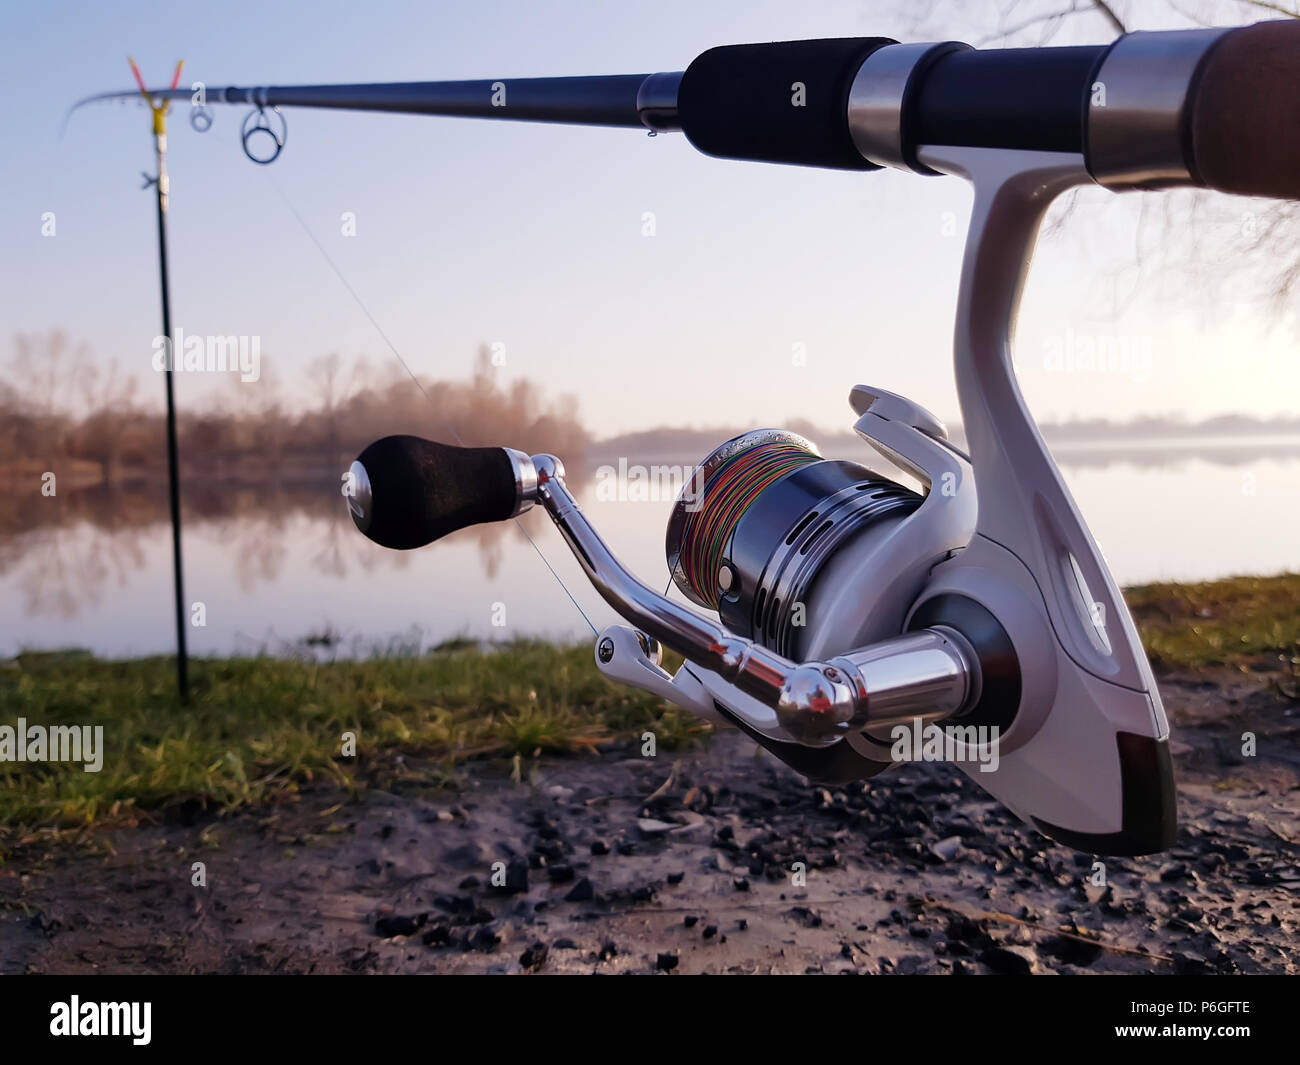 https://c8.alamy.com/comp/P6GFTE/fishermans-reel-mounted-on-a-fishing-rod-feeder-fishing-in-english-style-P6GFTE.jpg